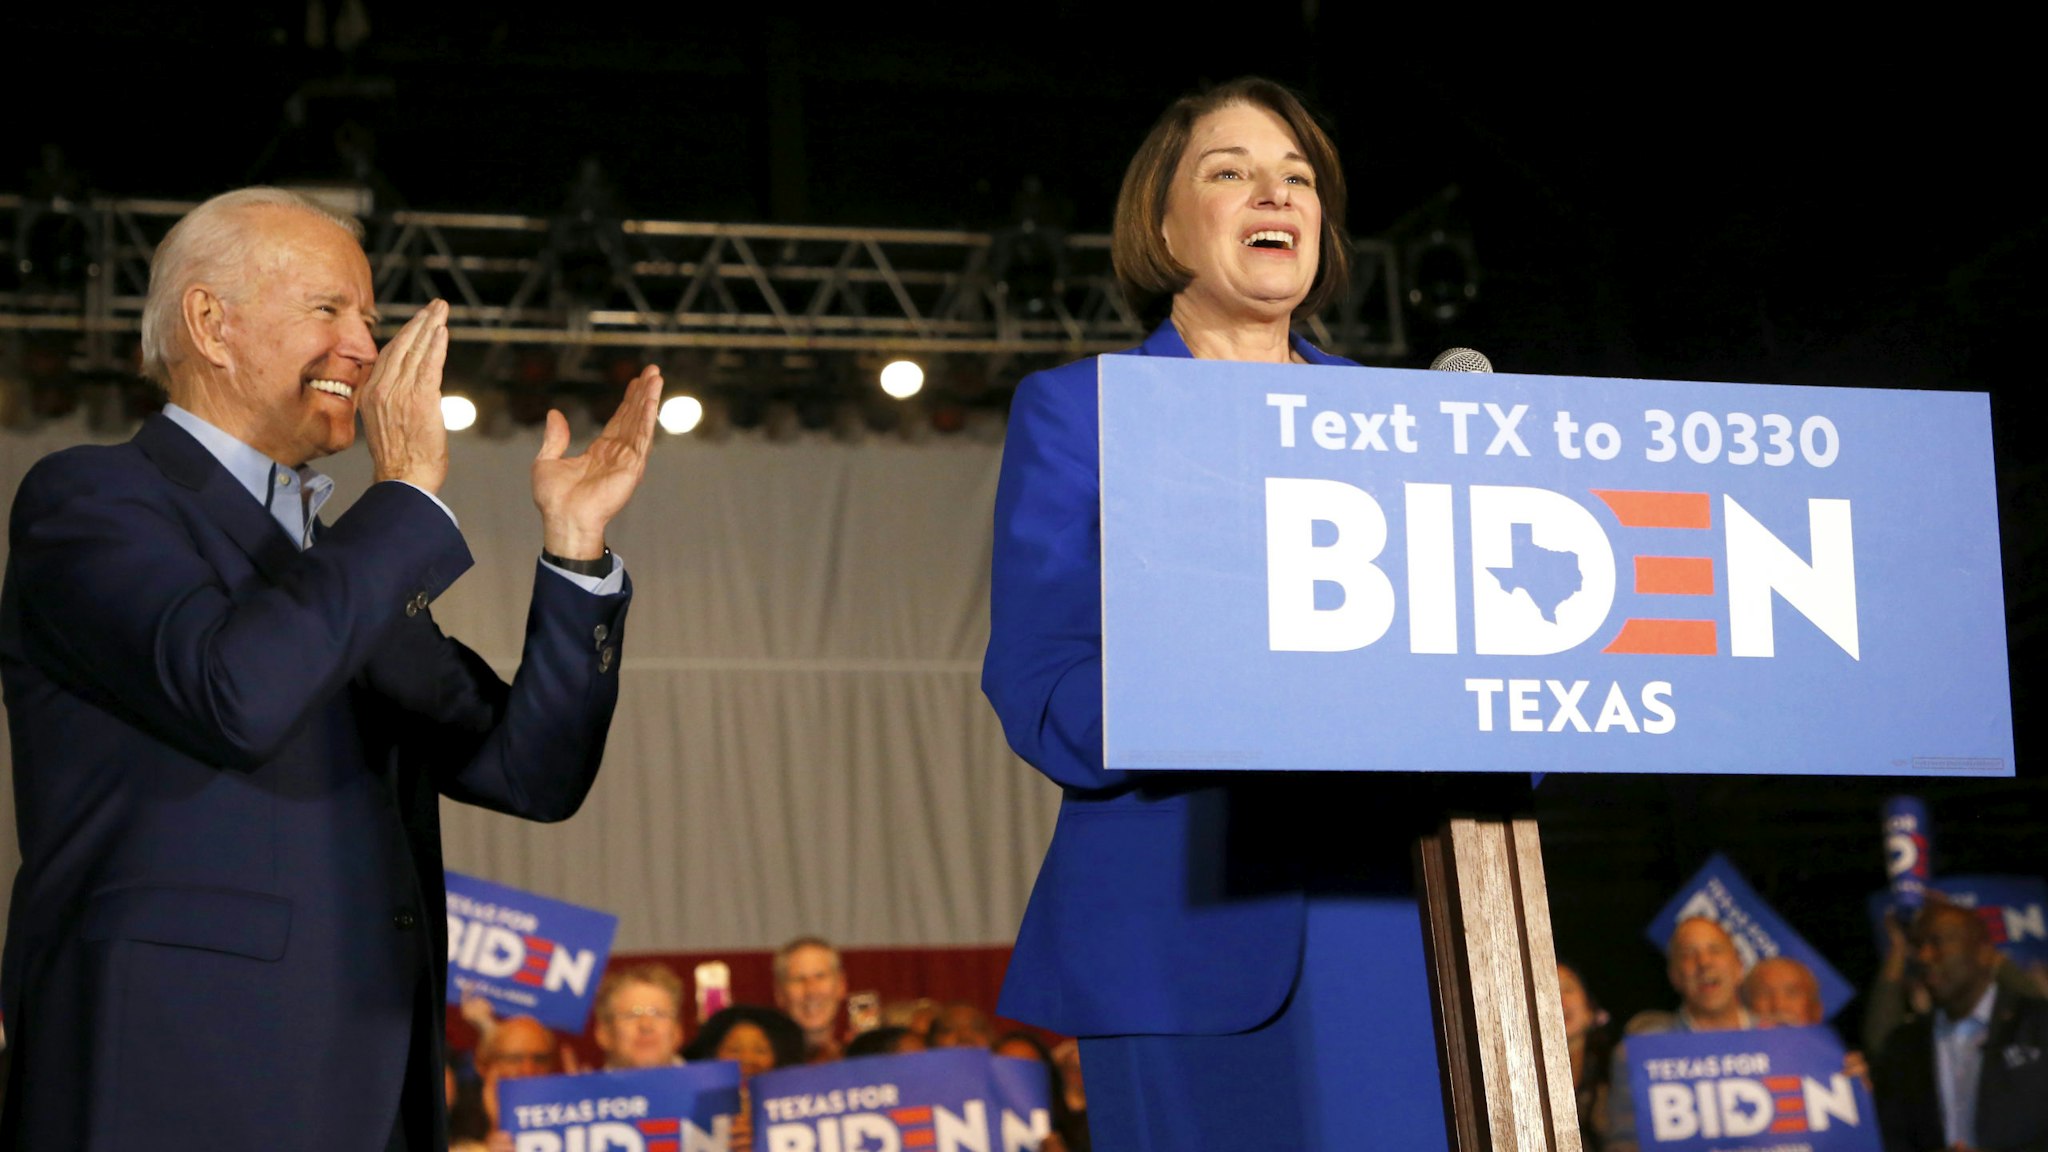 DALLAS, TX - MARCH 02: Democratic presidential candidate former Vice President Joe Biden is joined on stage by Sen. Amy Klobuchar (D-MN) during a campaign event on March 2, 2020 in Dallas, Texas. Klobuchar has suspended her campaign and endorsed Biden before the upcoming Super Tuesday Democratic presidential primaries.